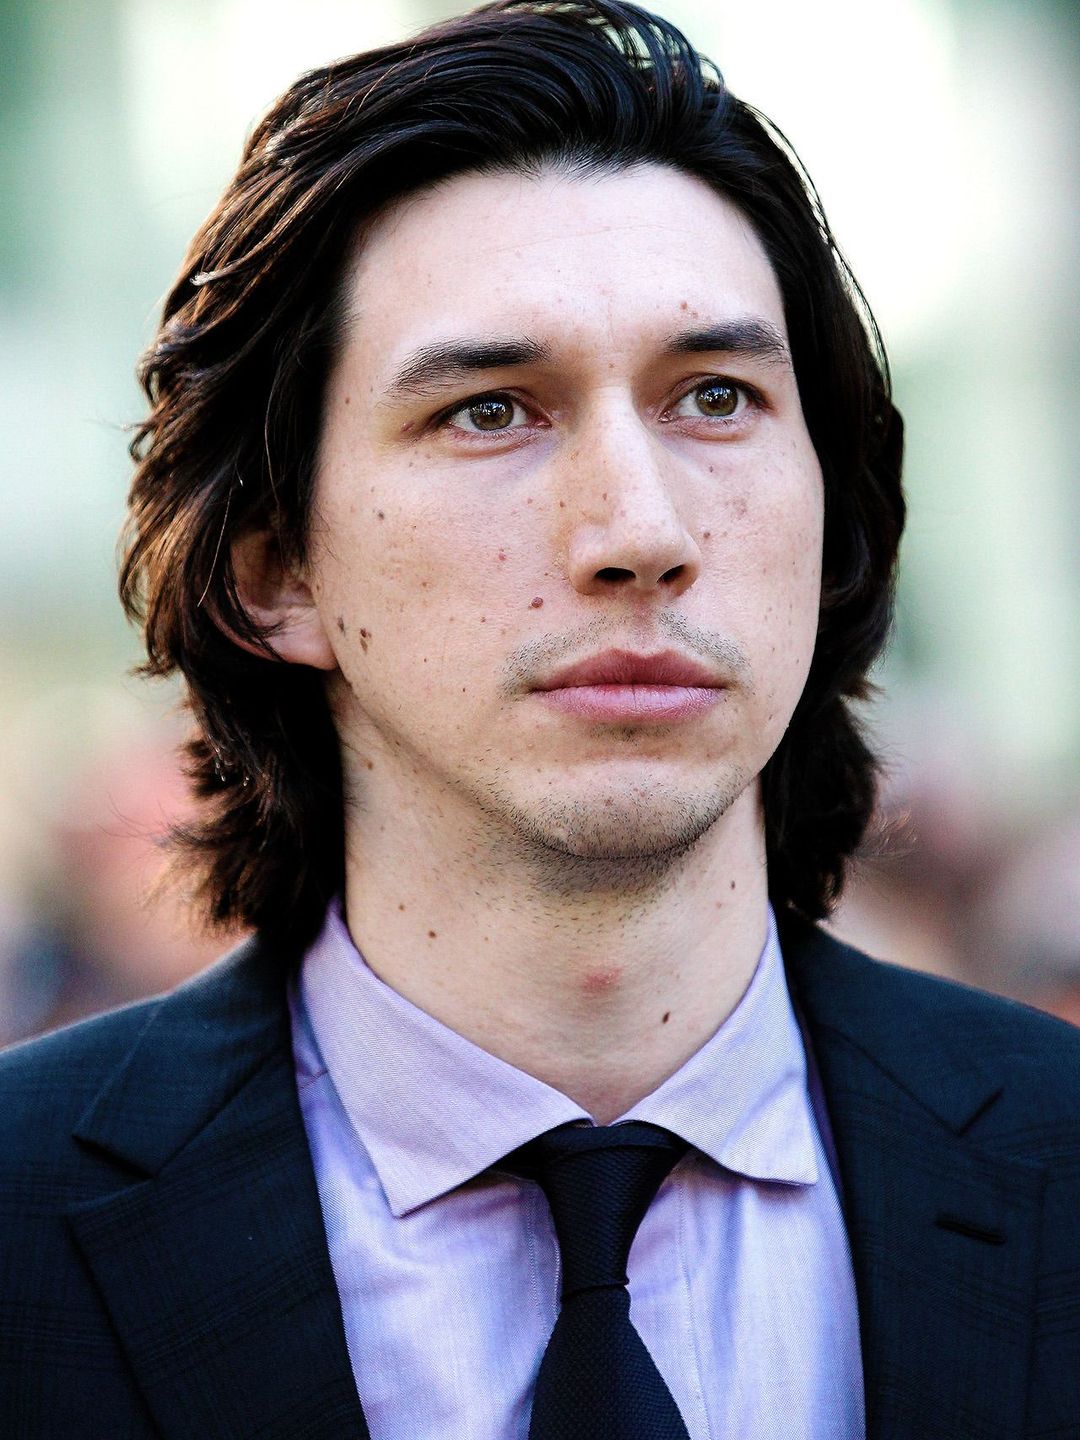 Adam Driver in his youth